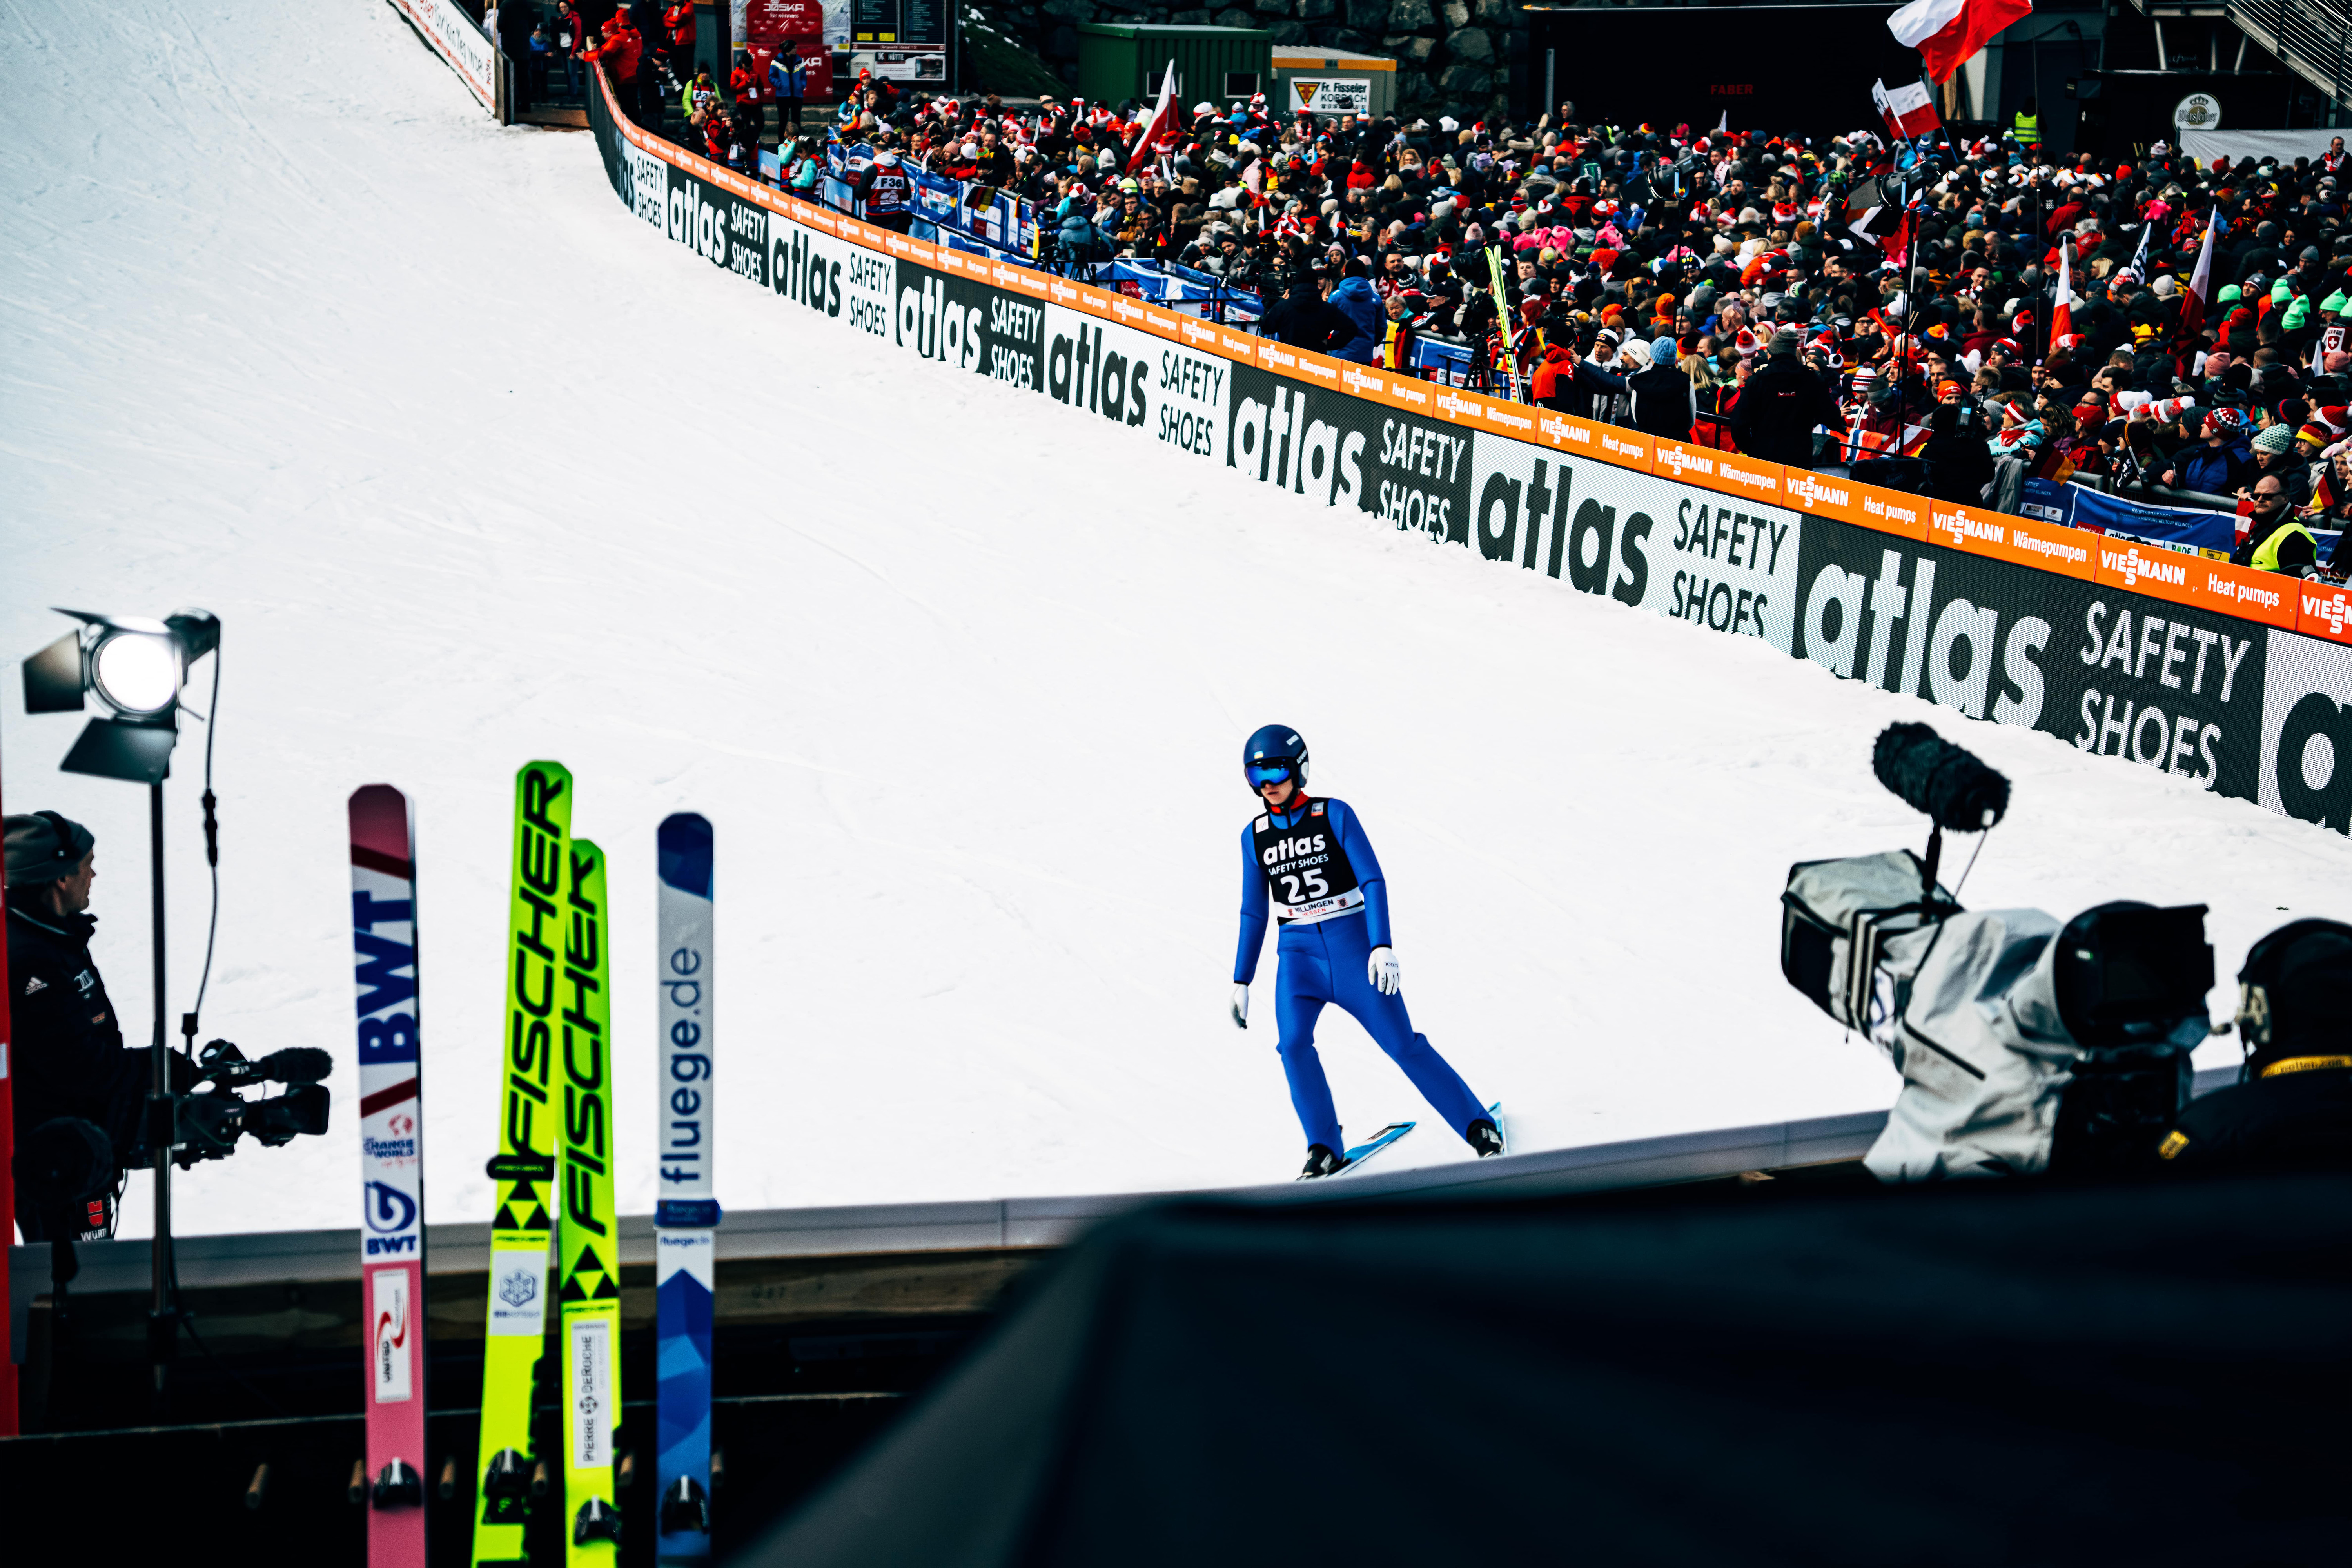 ATLAS® LIVE AT THE FIS SKI JUMPING WORLD CUP IN WILLINGEN